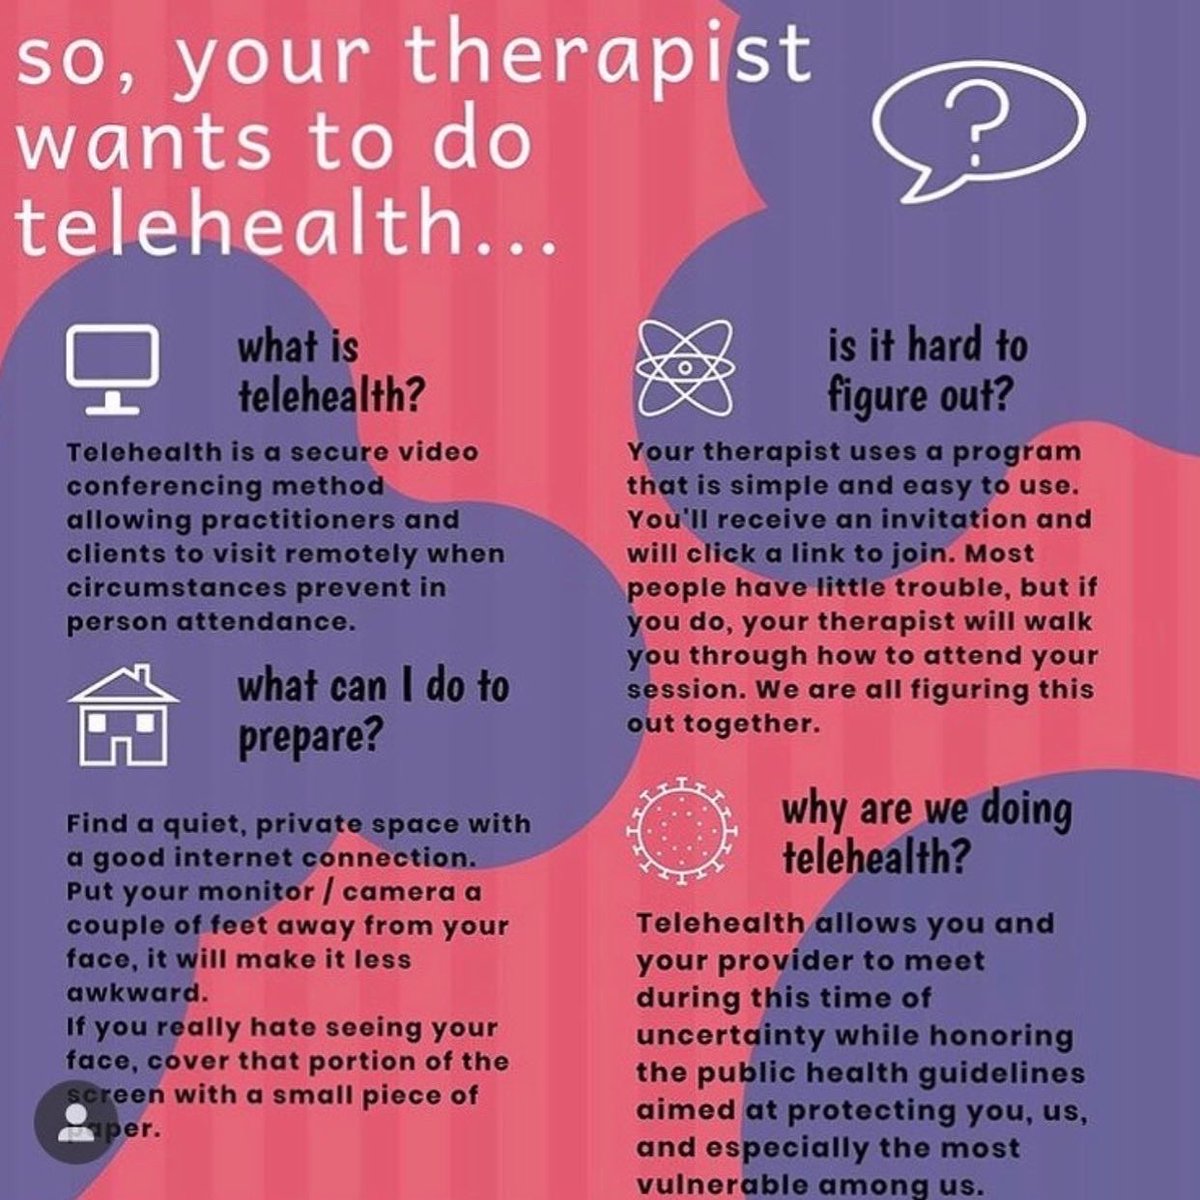 The Counseling Center is available for online counseling this semester! If you’re interested in services or want more information, just give us a call!
.
#call4counseling #telementalhealth #mentalhealthmatters #uwg20 #uwg21 #uwg22 #uwg23 #uwg24